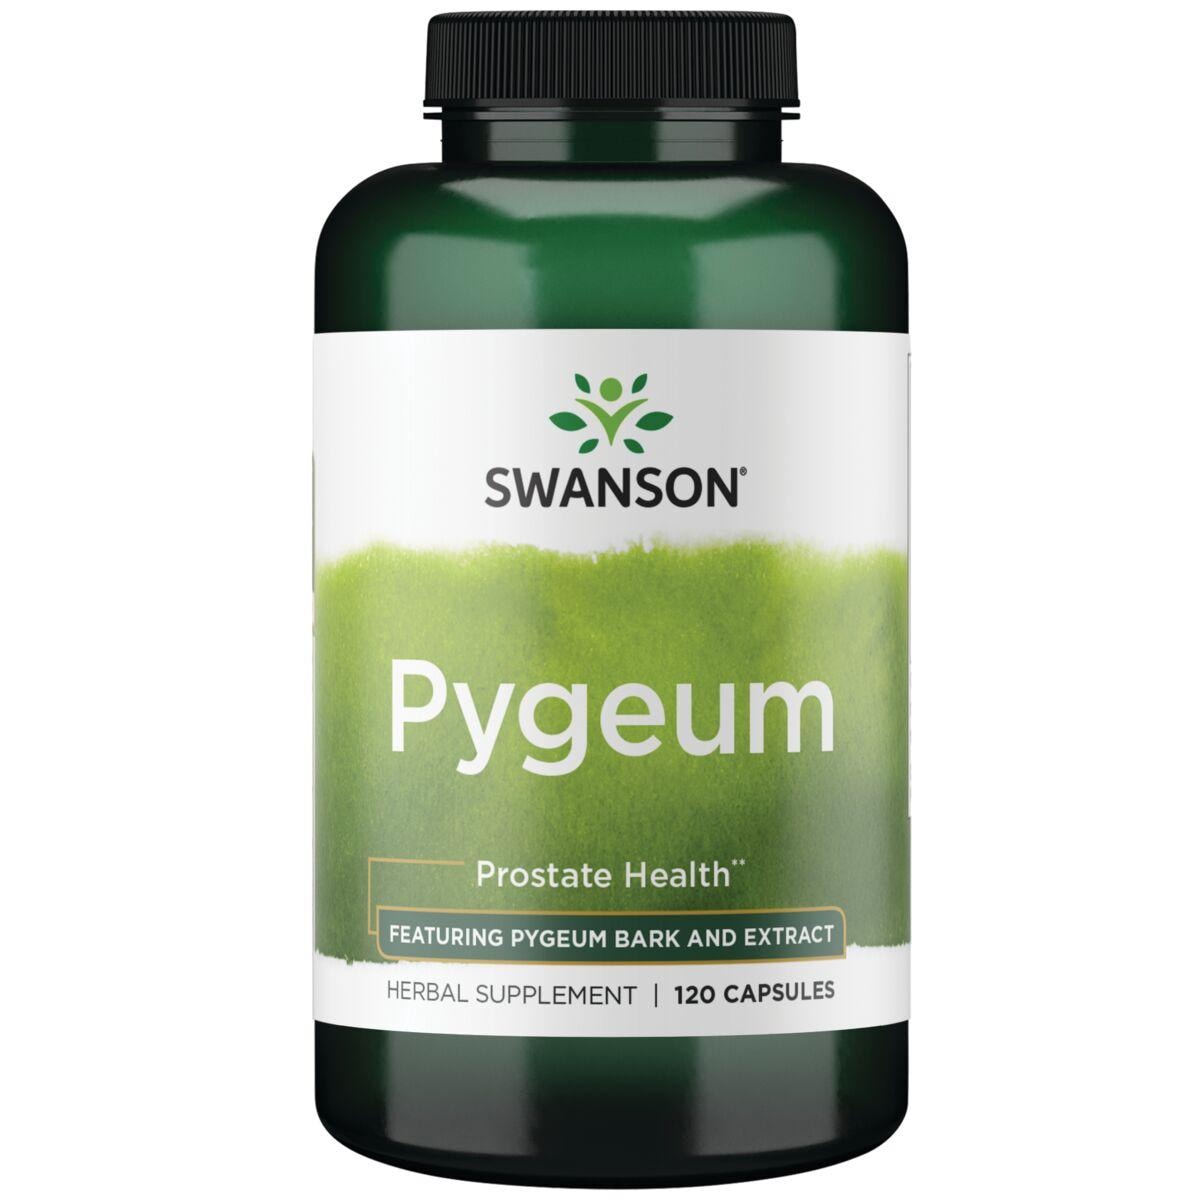 Swanson Superior Herbs Pygeum - Featuring Bark and Extract Vitamin | 120 Caps | Prostate Health